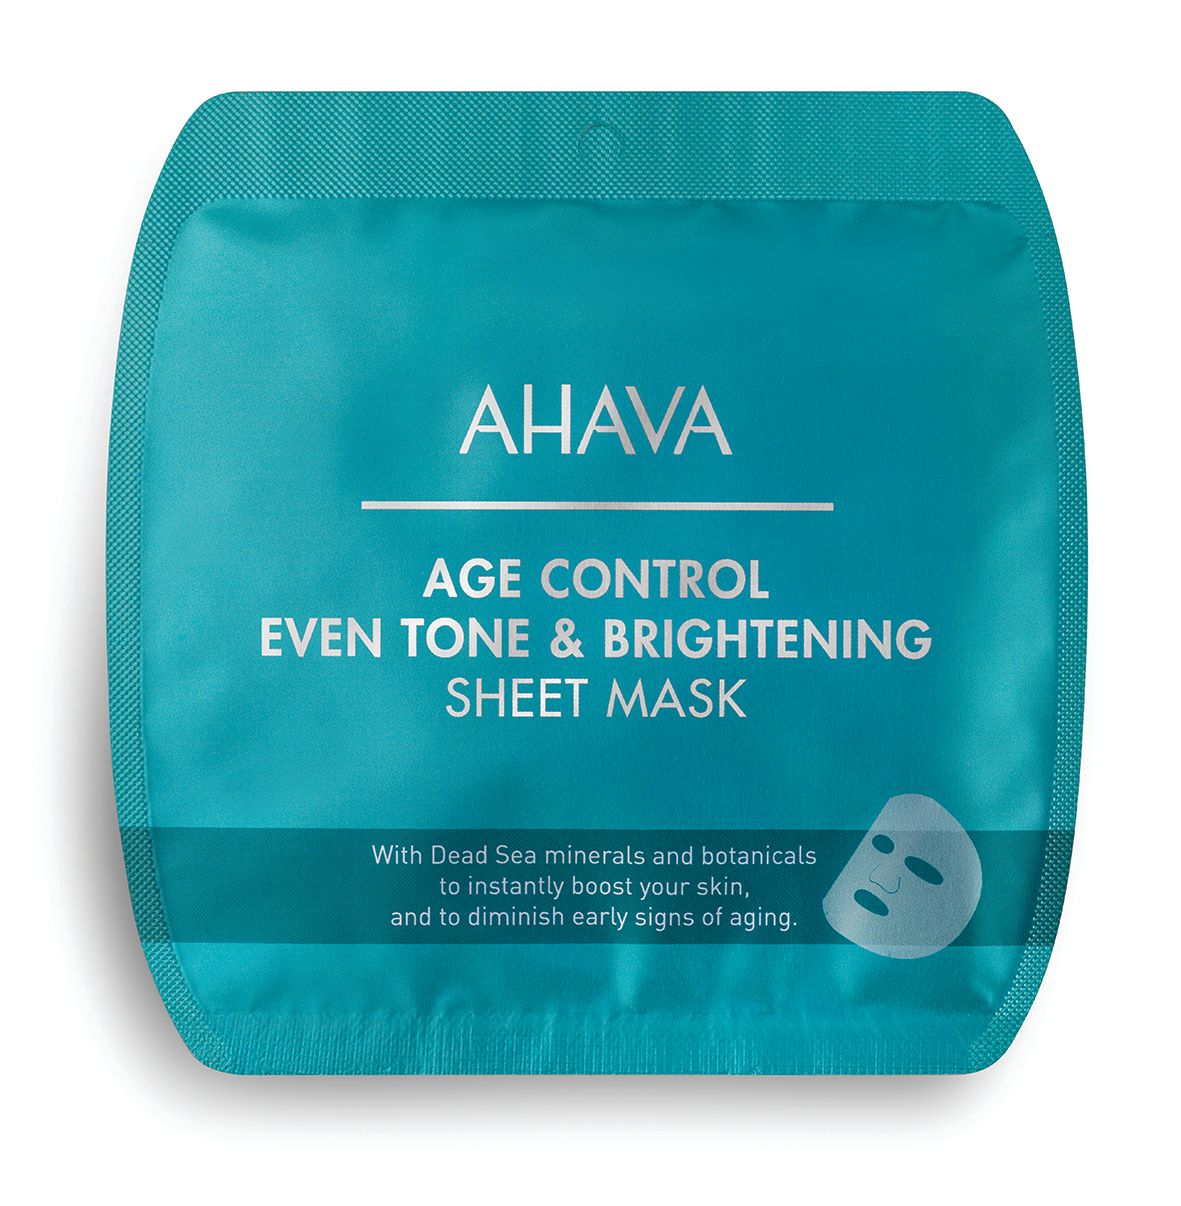 *Age Control Even Tone & Brightening Sheet Mask